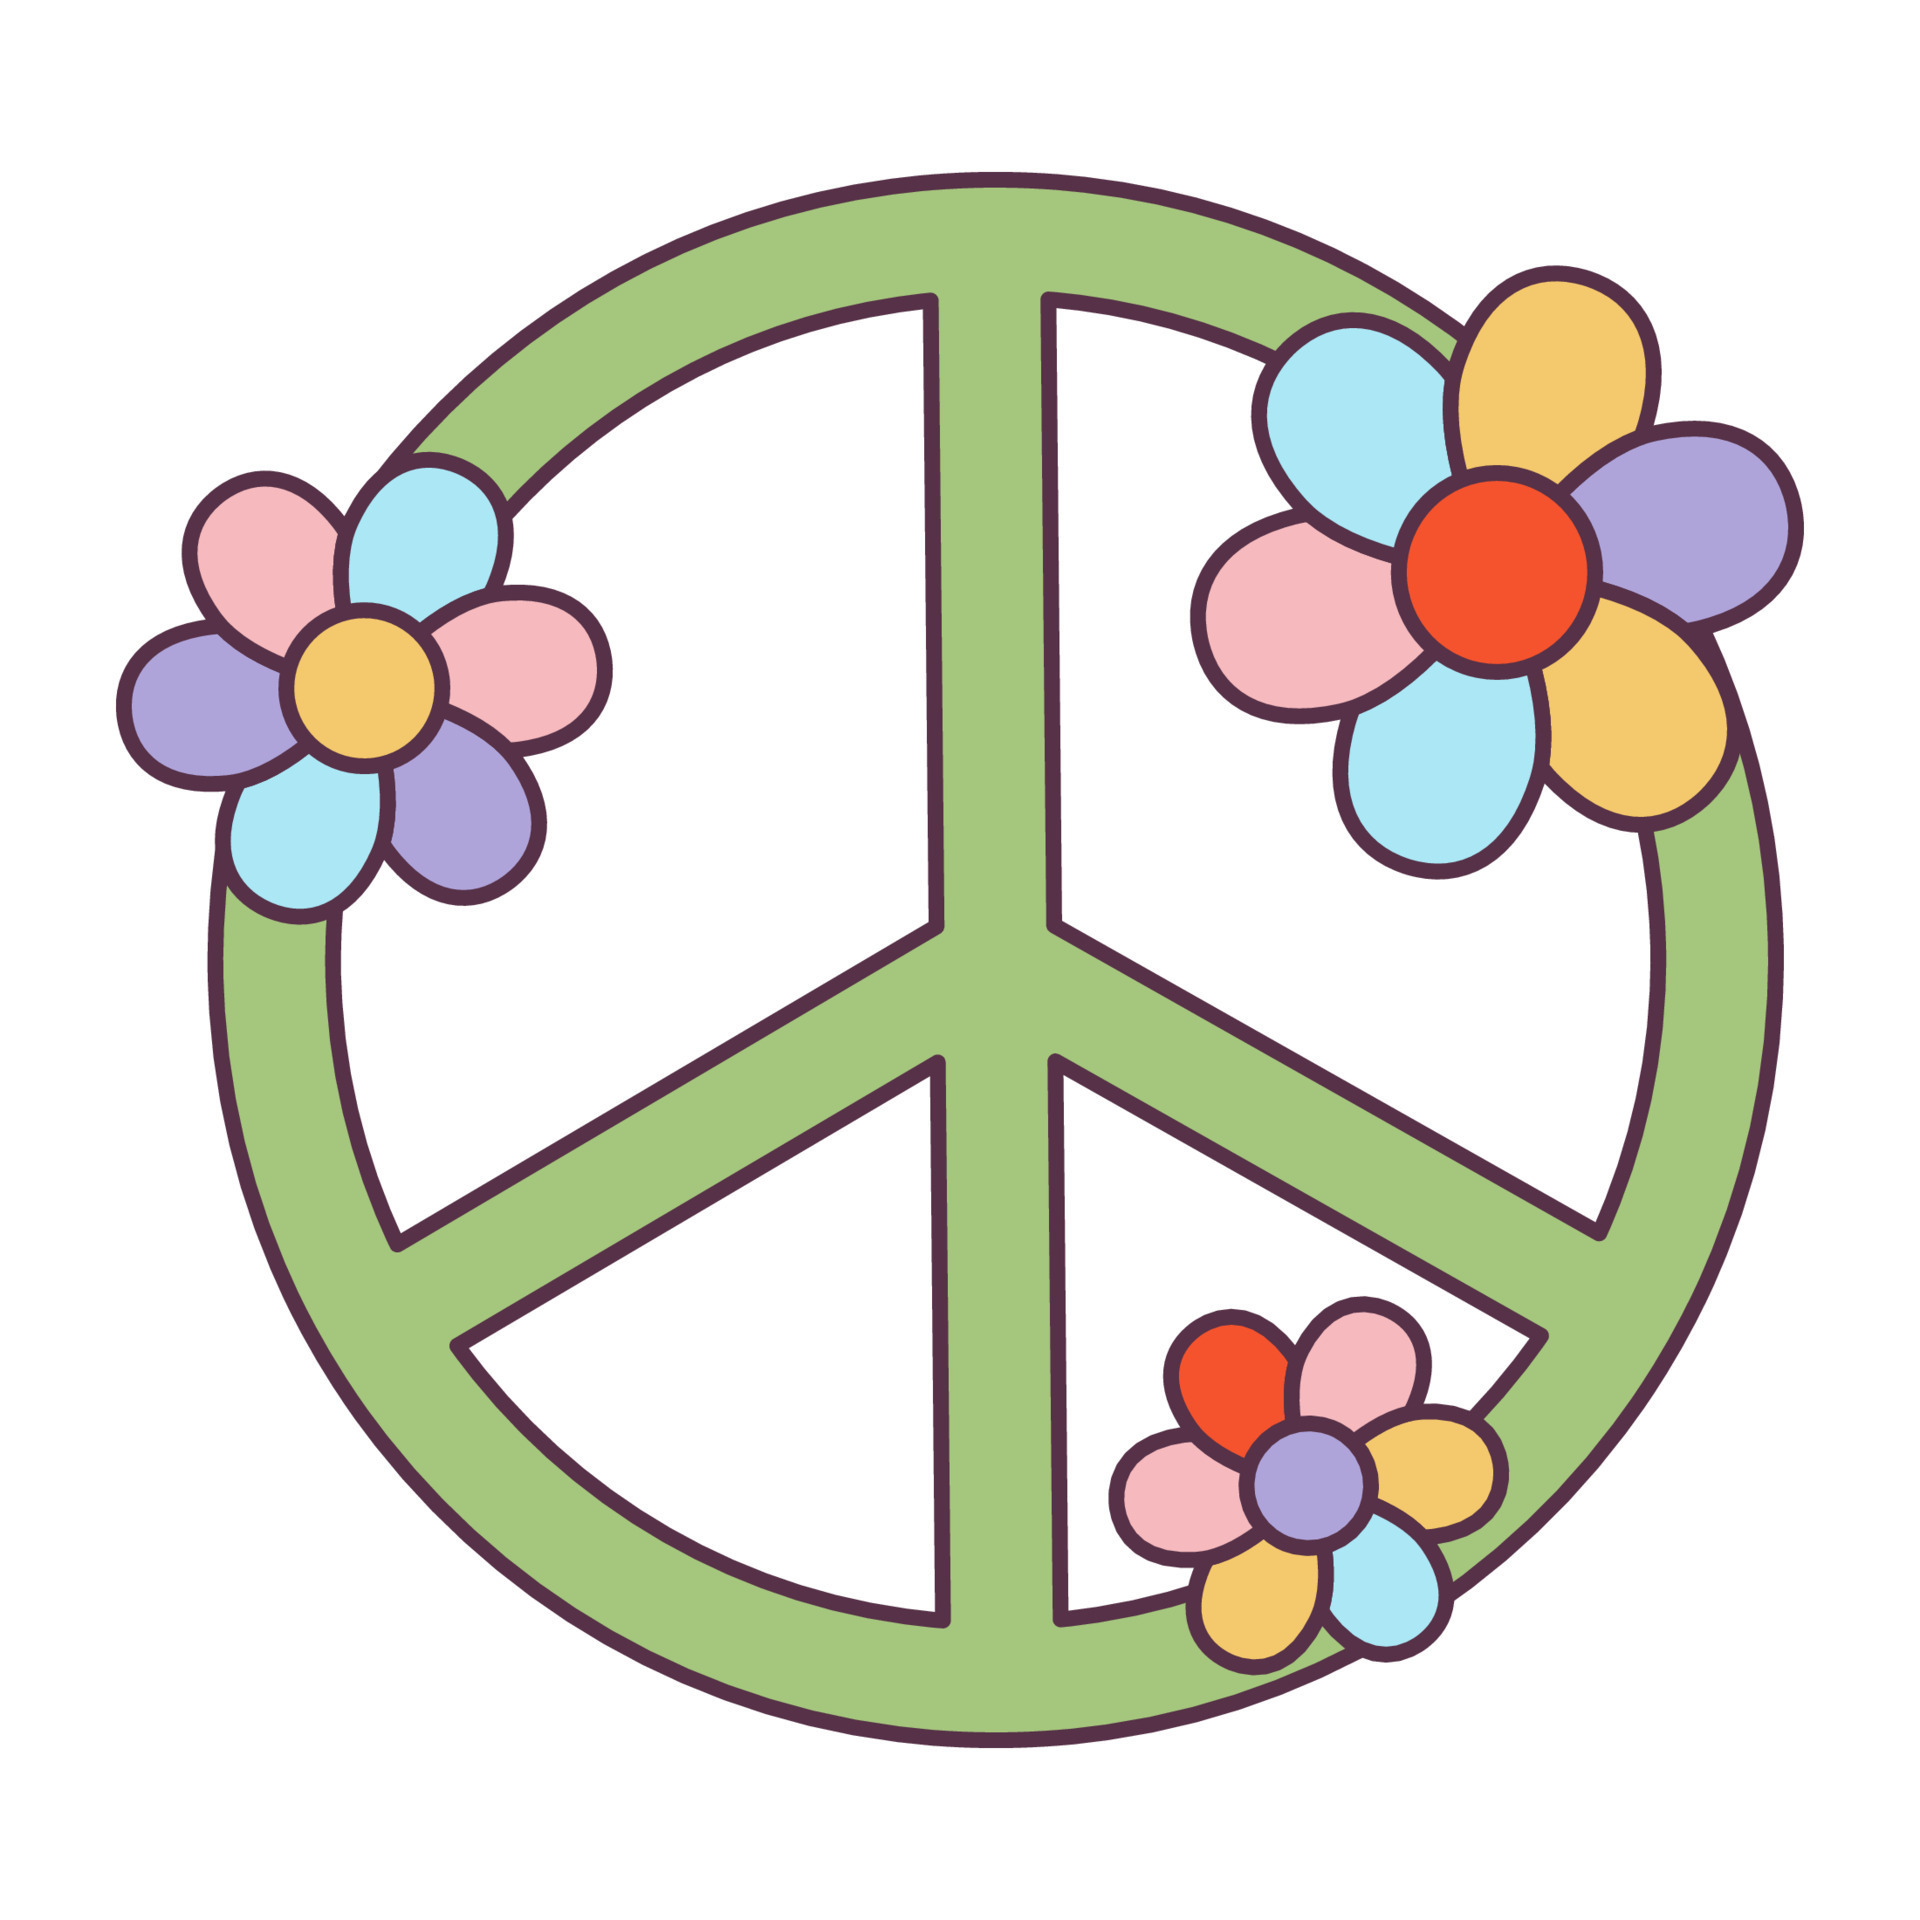 Peace Hippie Psychedelic Hand Transparent Background - Hippie